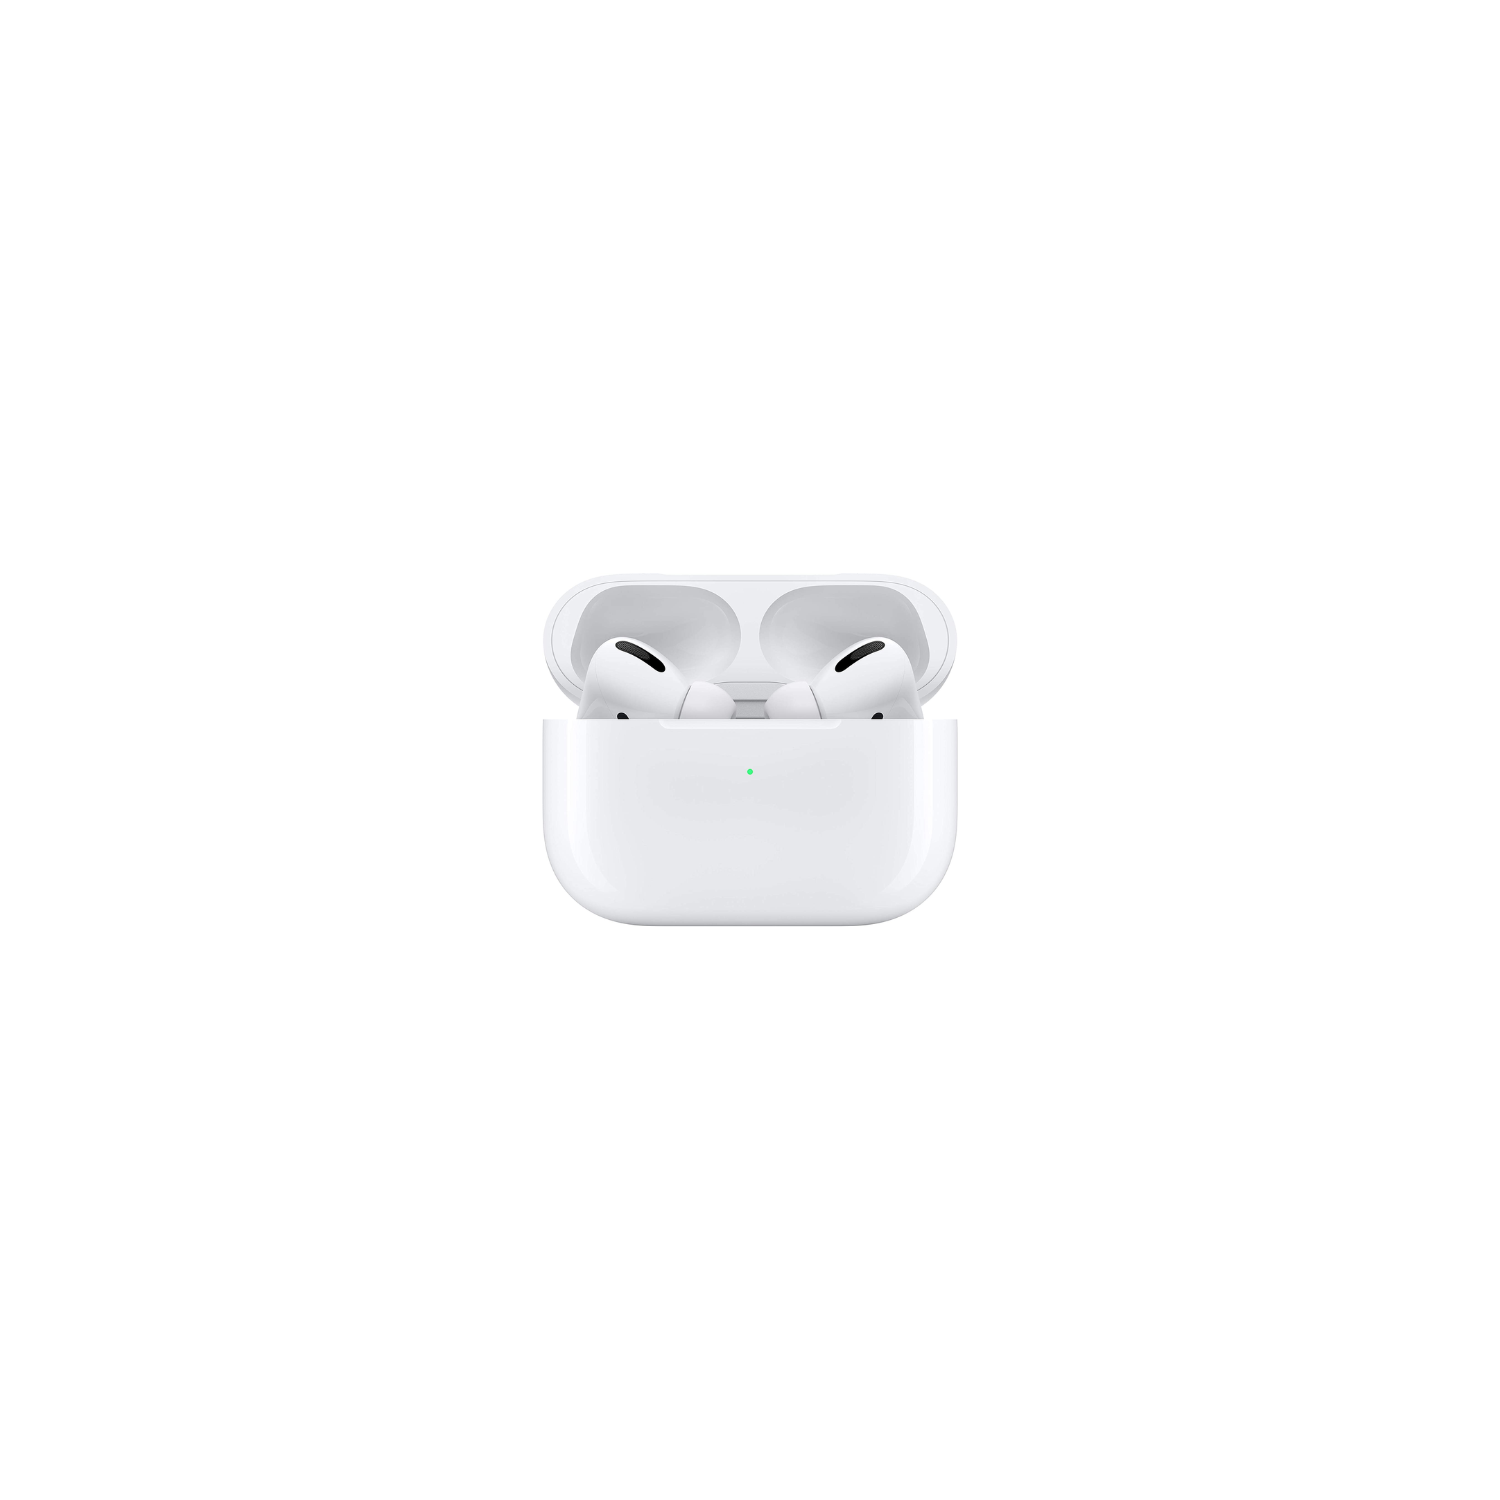 Refurbished (Good) - Apple AirPods Pro In-Ear Noise Cancelling Truly Wireless Headphones - White